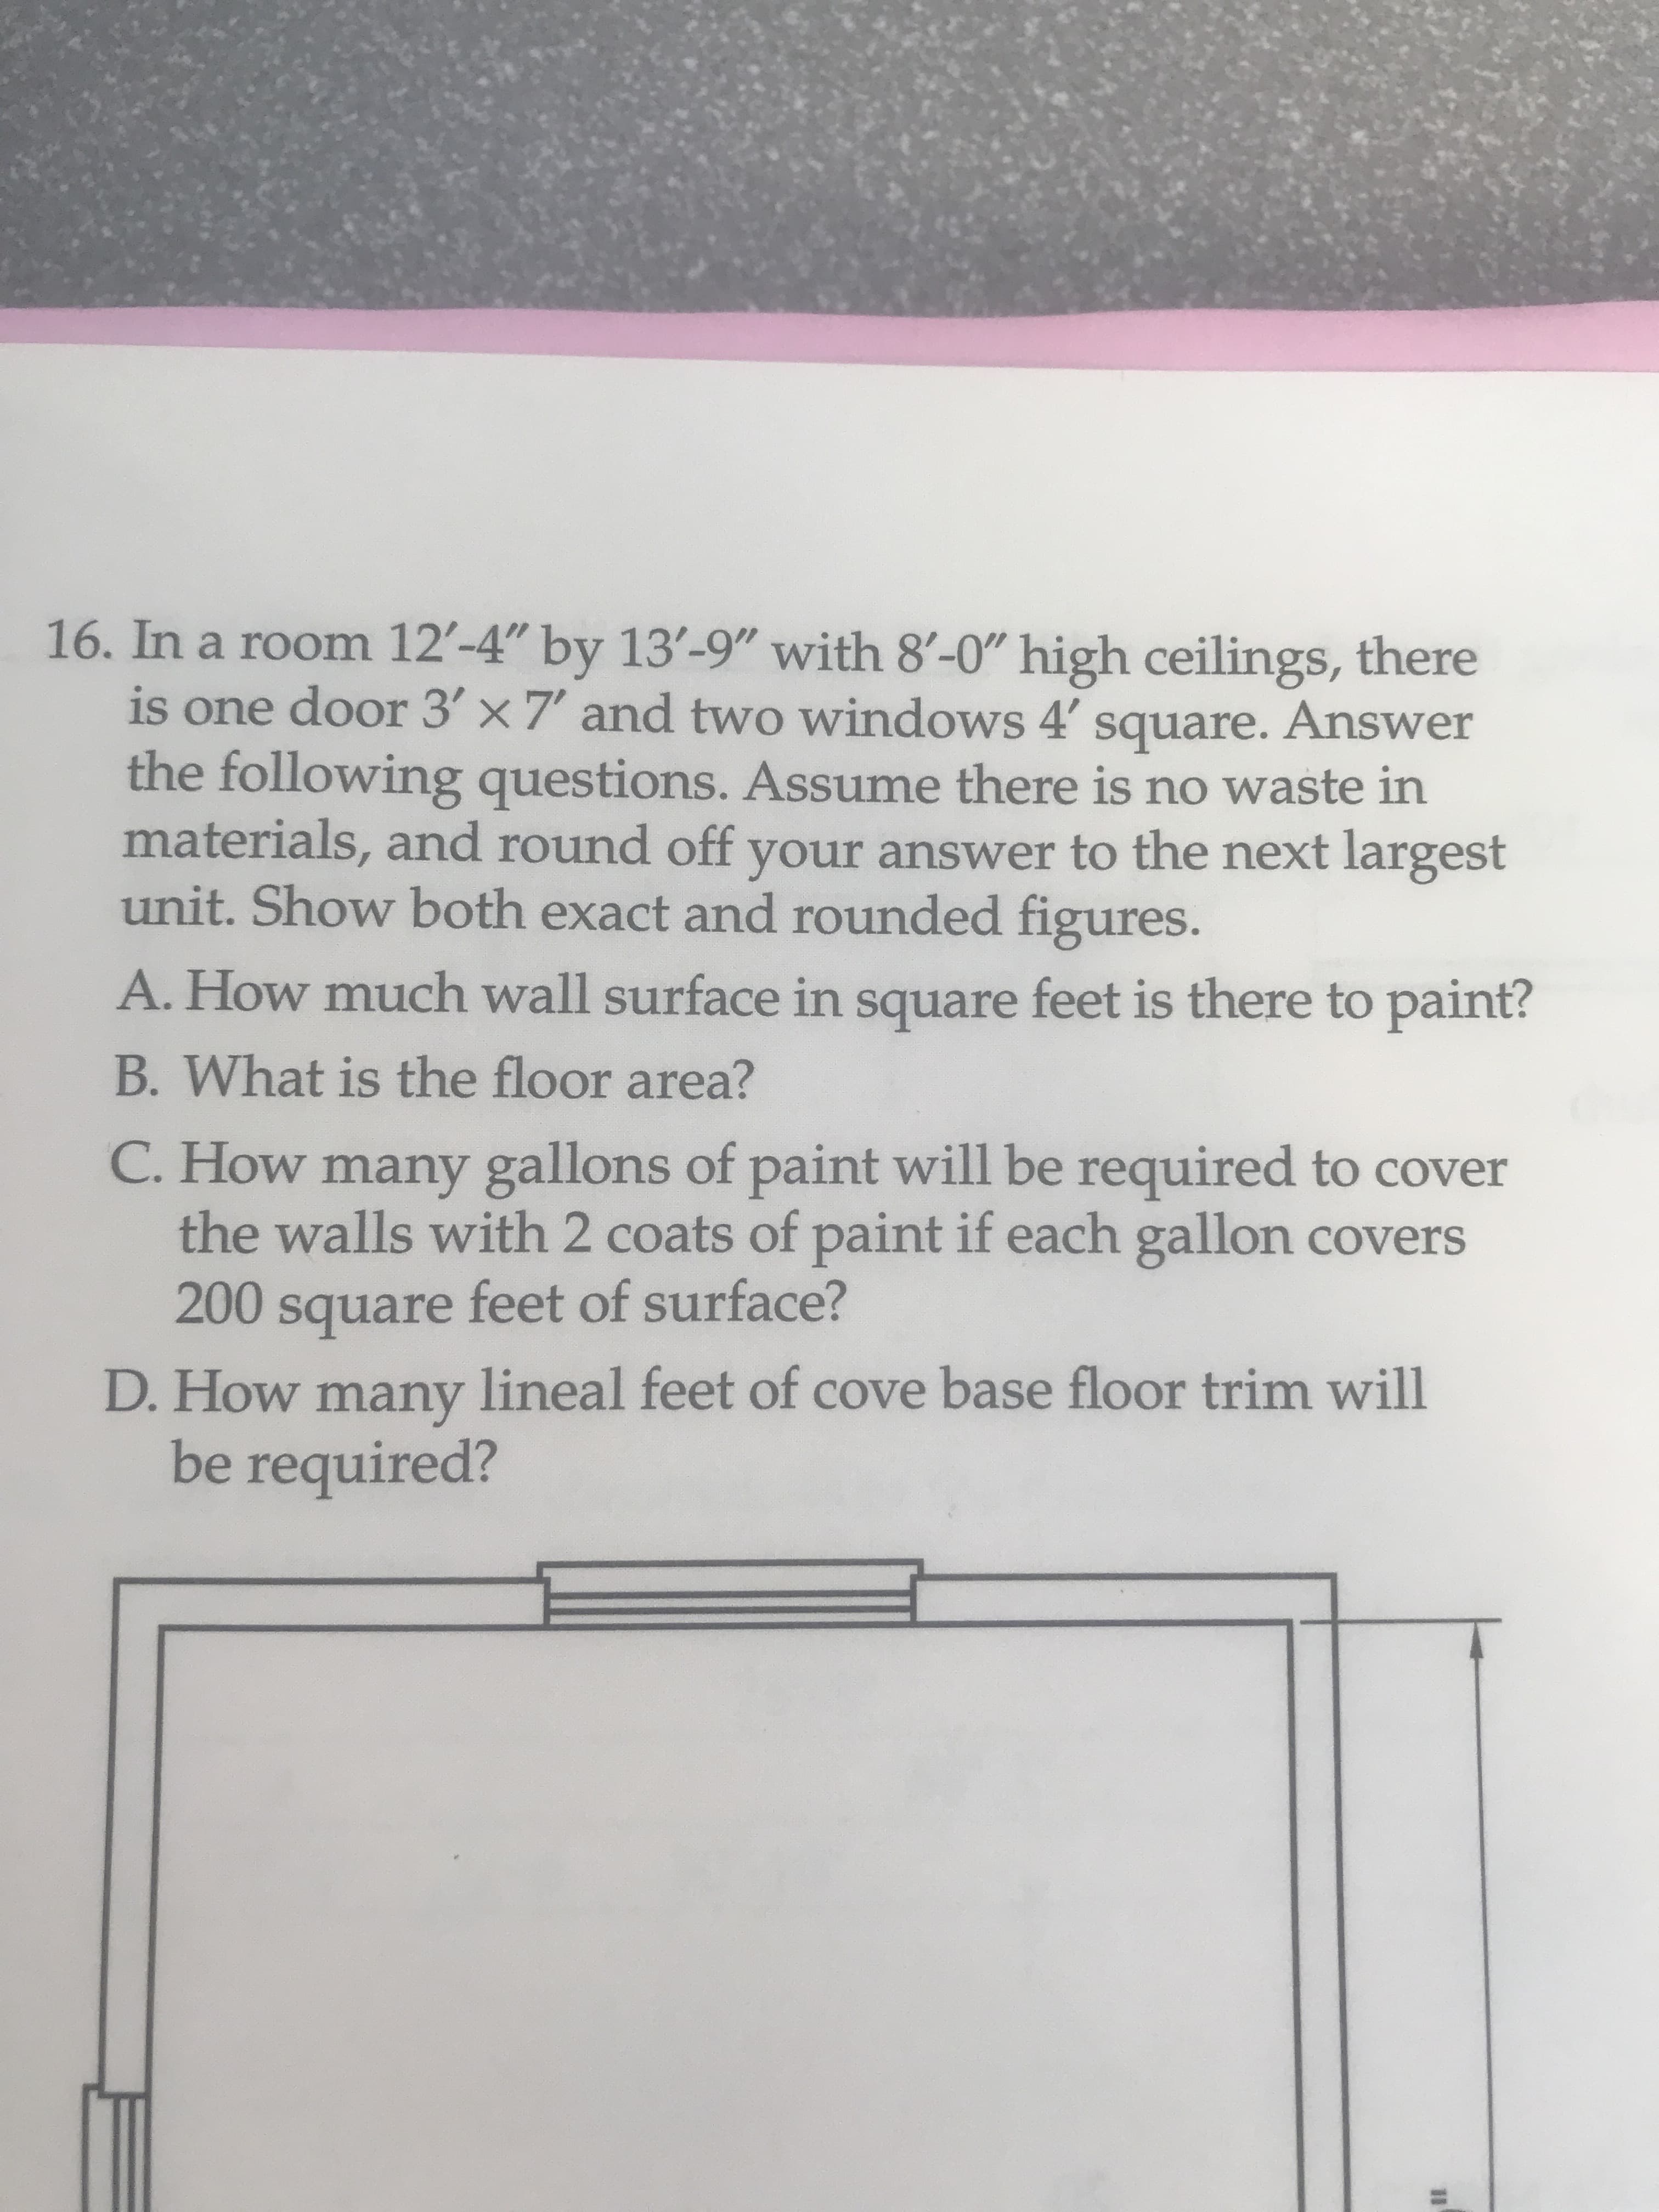 16. In a room 12'-4" by 13'-9" with 8'-0" high ceilings, there
is one door 3' x 7' and two windows 4' Answer
the following questions. Assume there is no waste in
materials, and round off your answer to the next largest
unit. Show both exact and rounded figures.
square.
A. How much wall surface in square feet is there to paint?
B. What is the floor area?
C. How many gallons of paint will be required to cover
the walls with 2 coats of paint if each gallon covers
200 square feet of surface?
D. How lineal feet of cove base floor trim will
many
be required?
%3D
